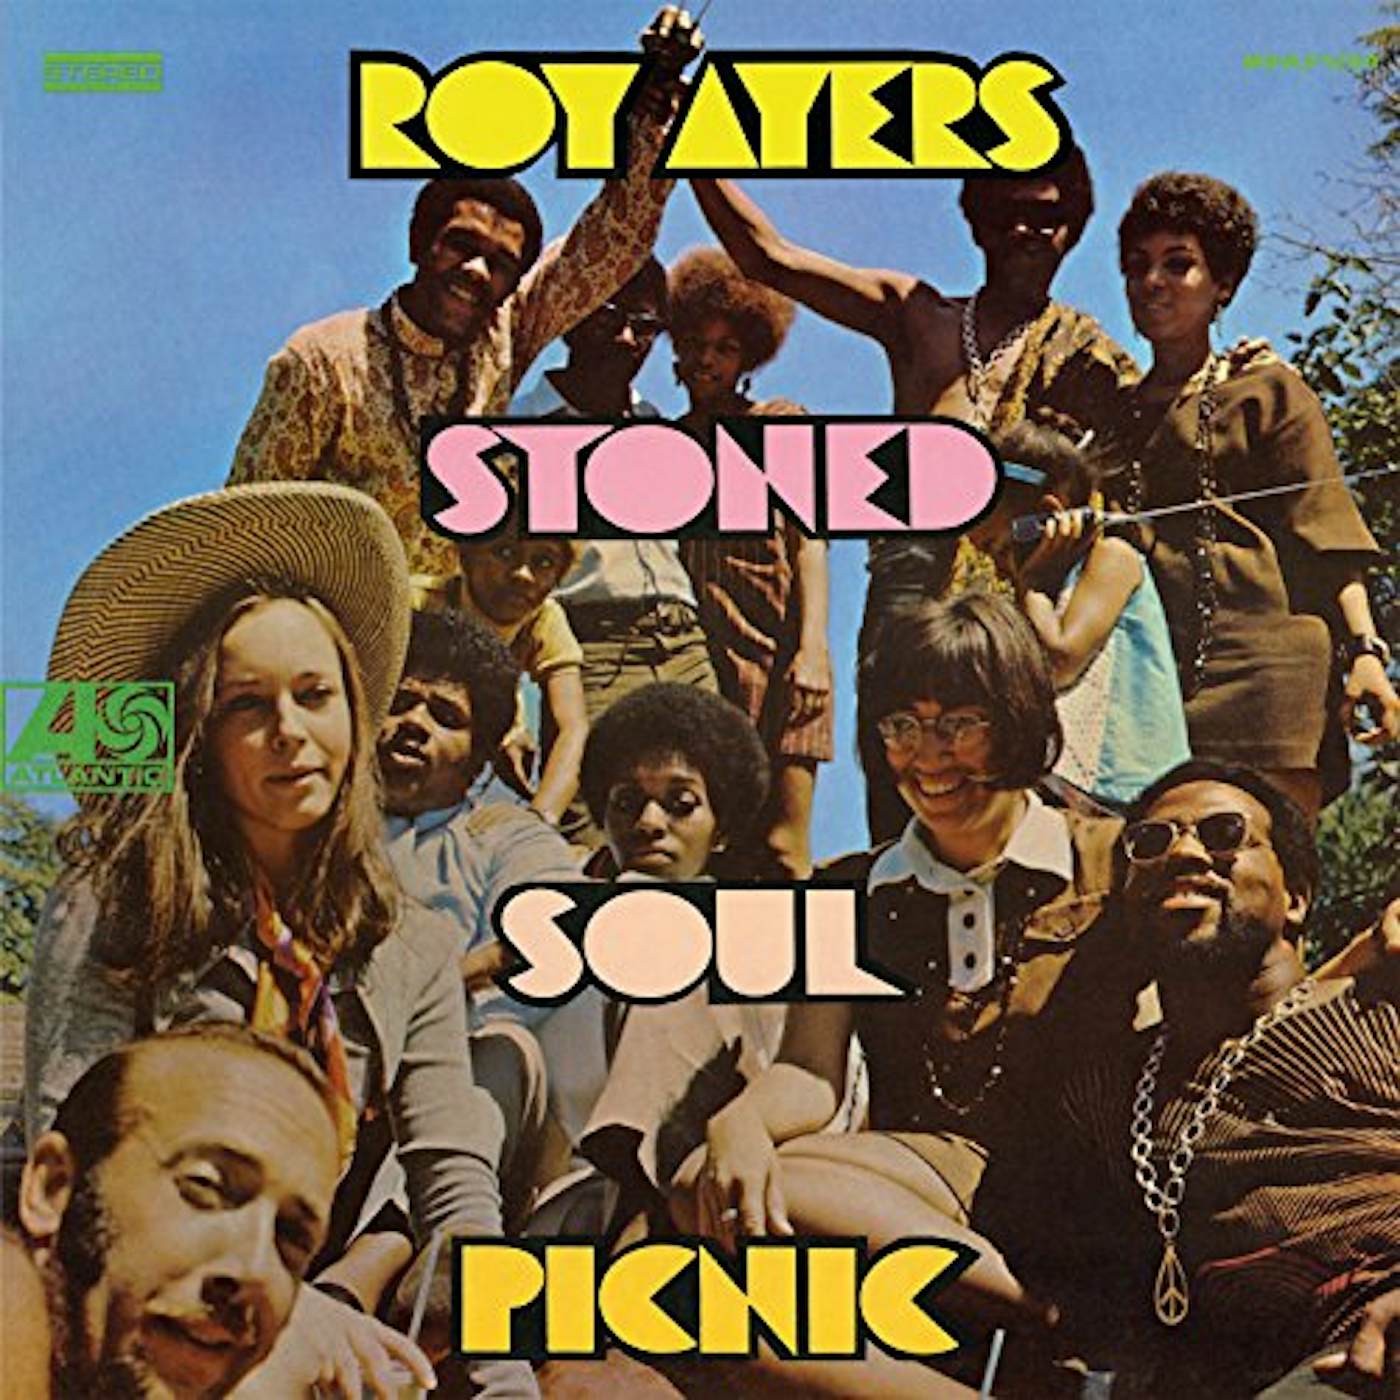 Roy Ayers STONED SOUL PICNIC Vinyl Record - Holland Release